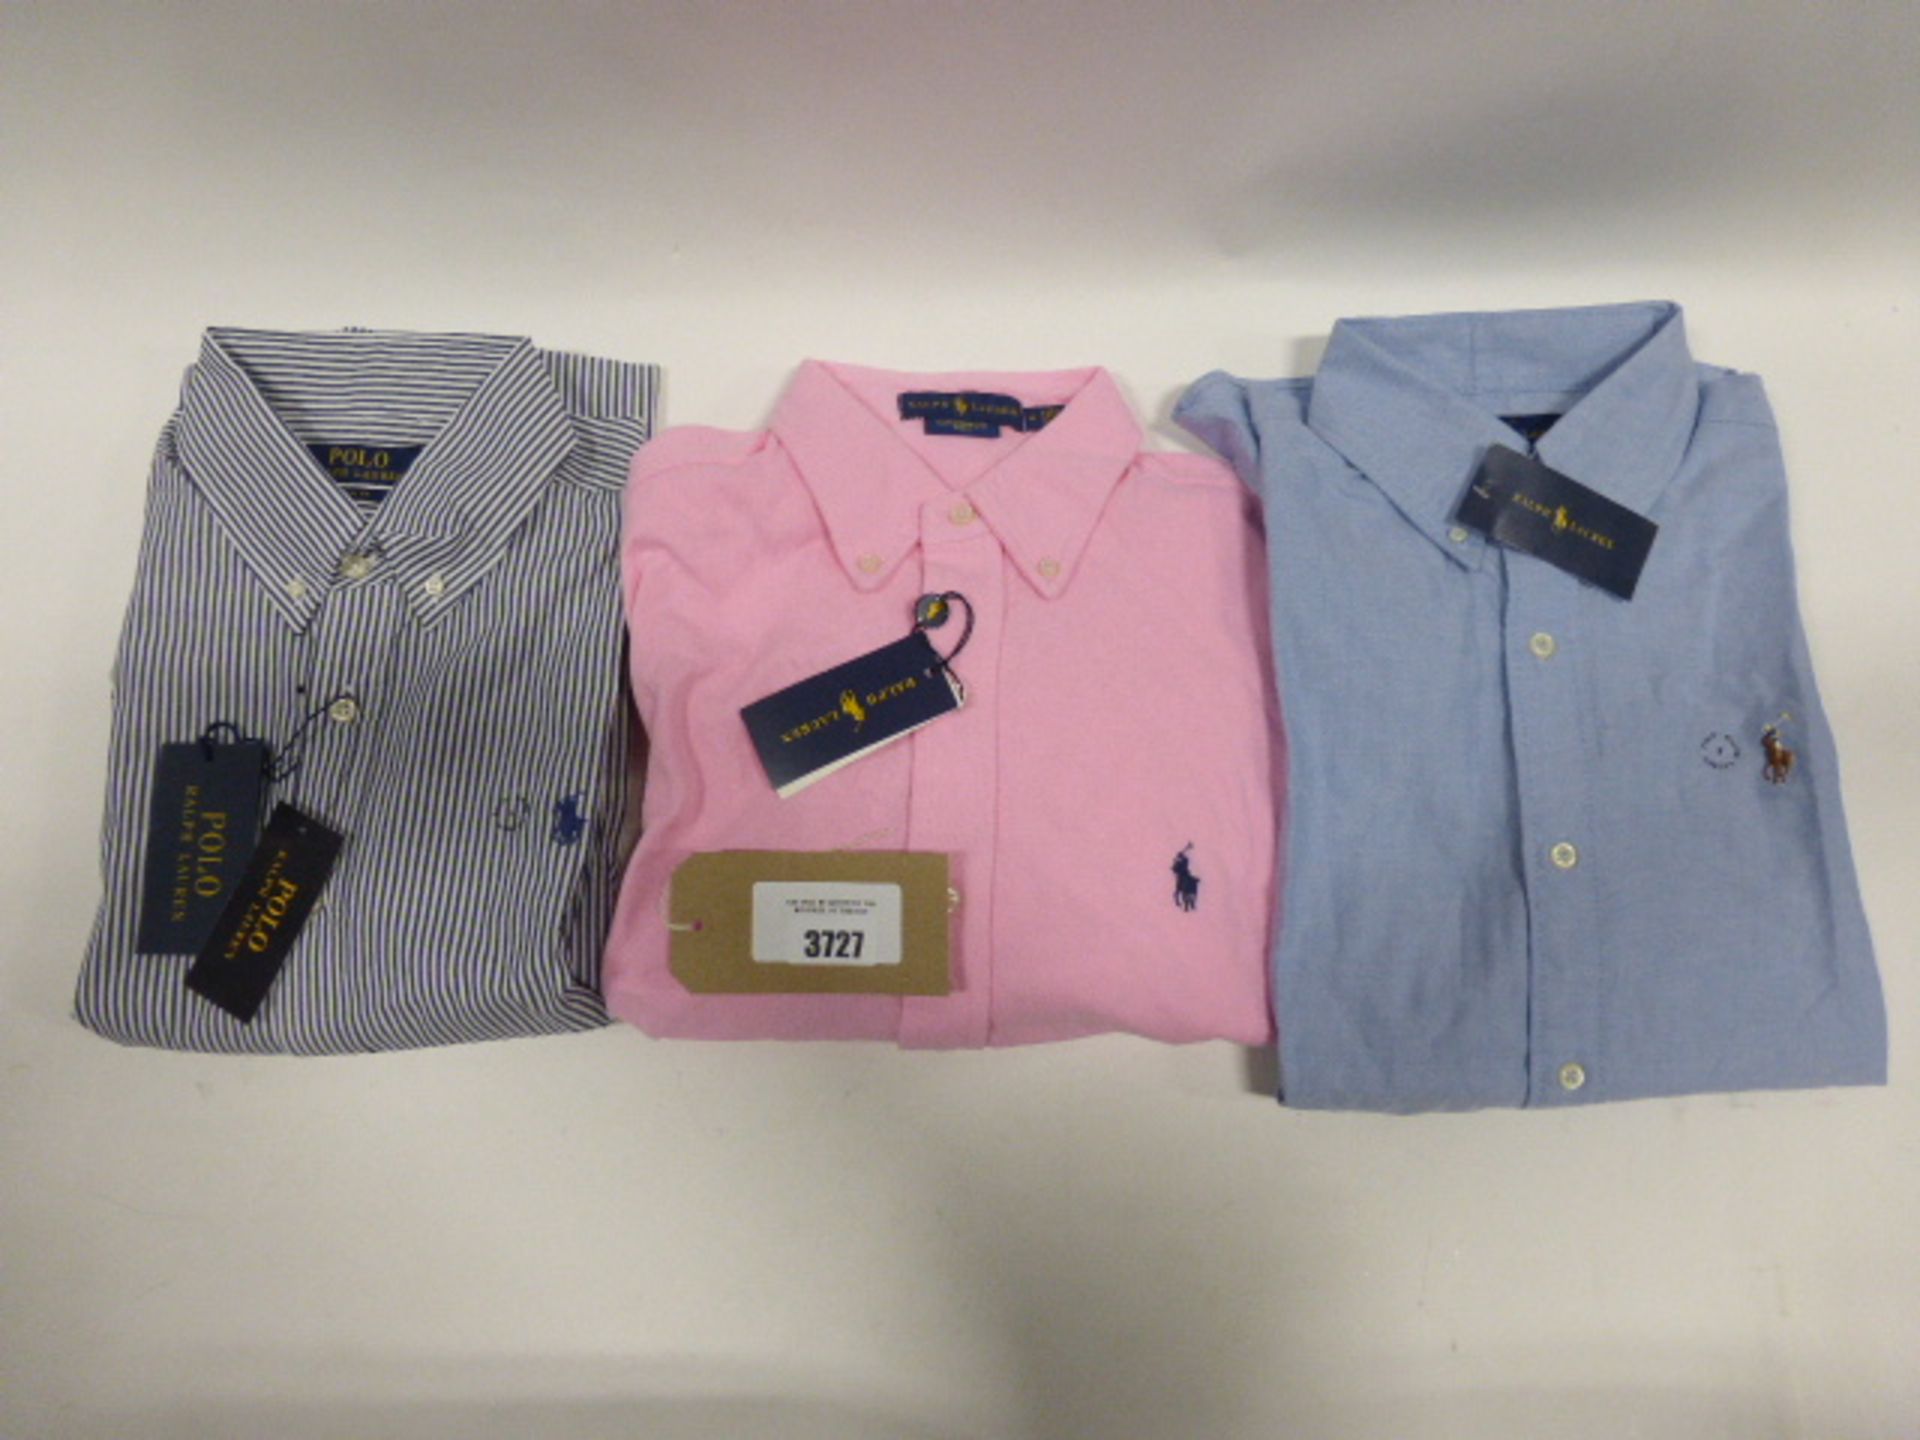 Three Polo Ralph Lauren Shirts blue size small, pink size medium and striped size large